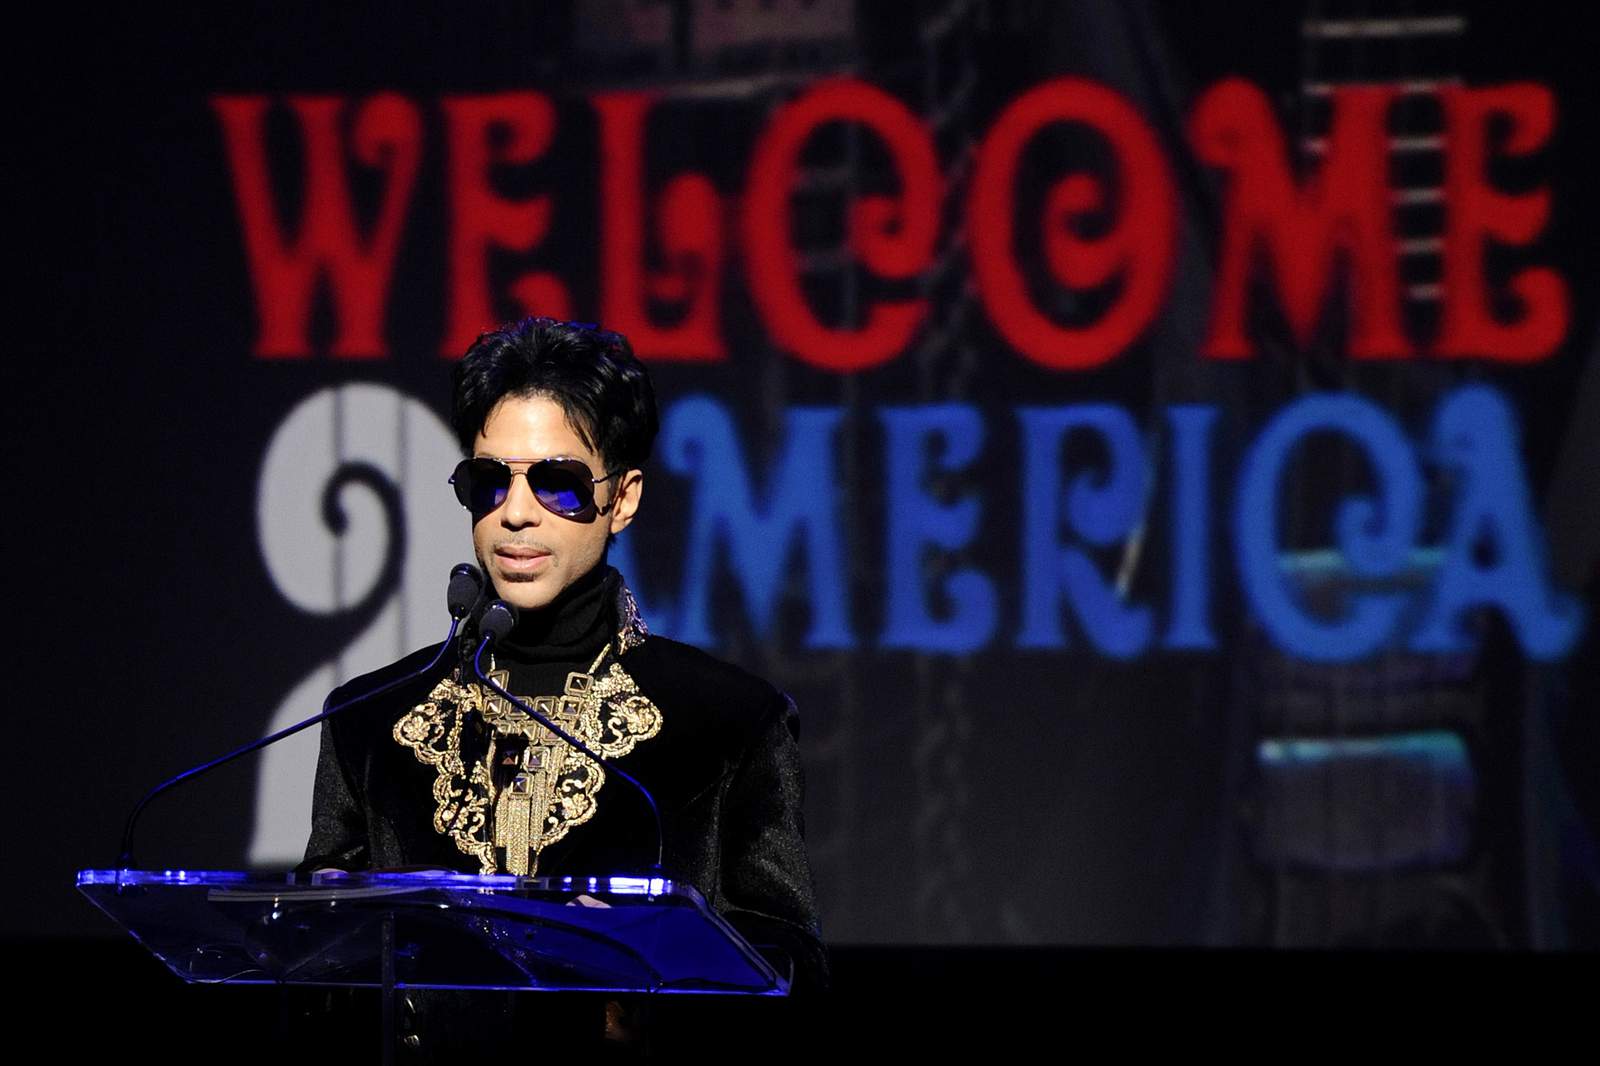 IRS says executors undervalued Prince's estate by 50%